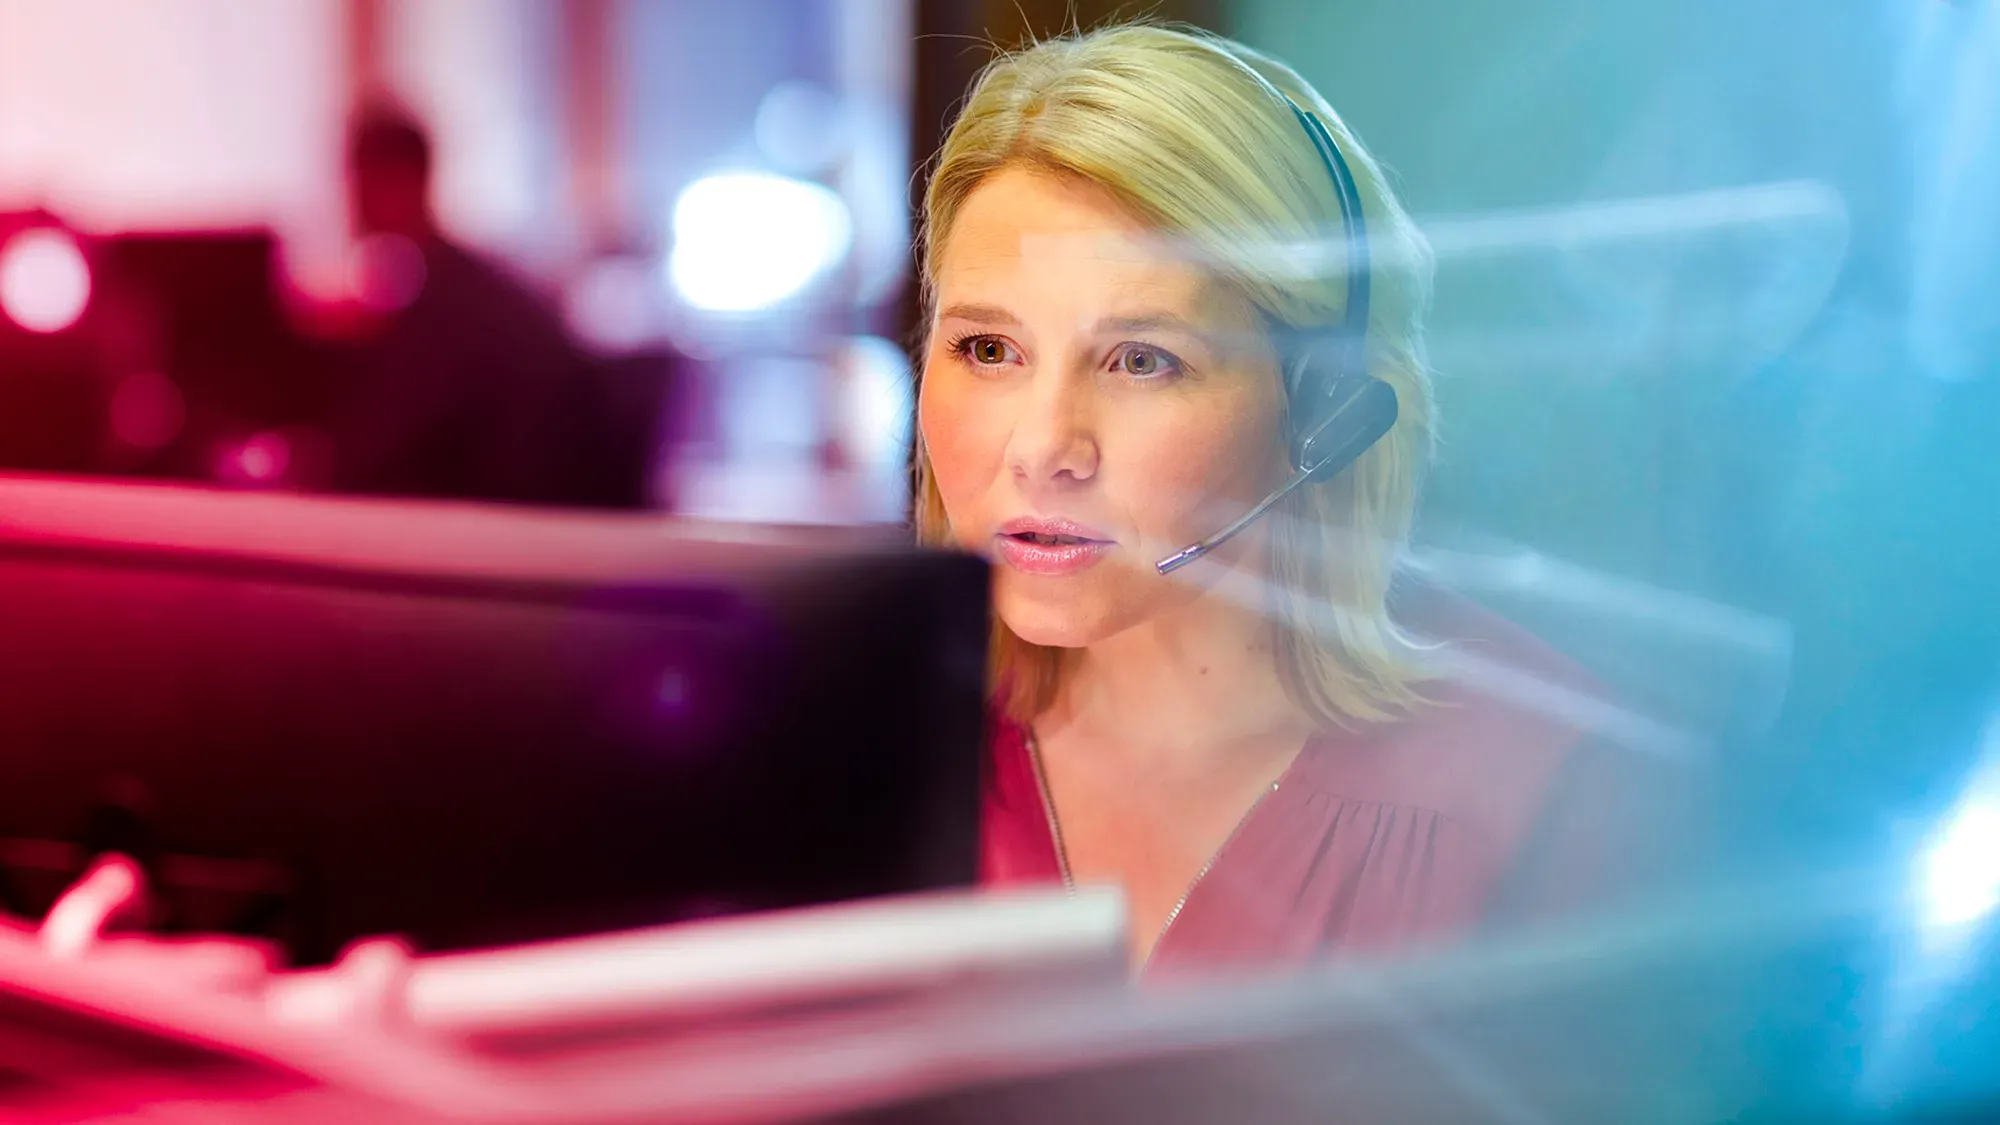 New Technology Takes on Call Center Fraudsters